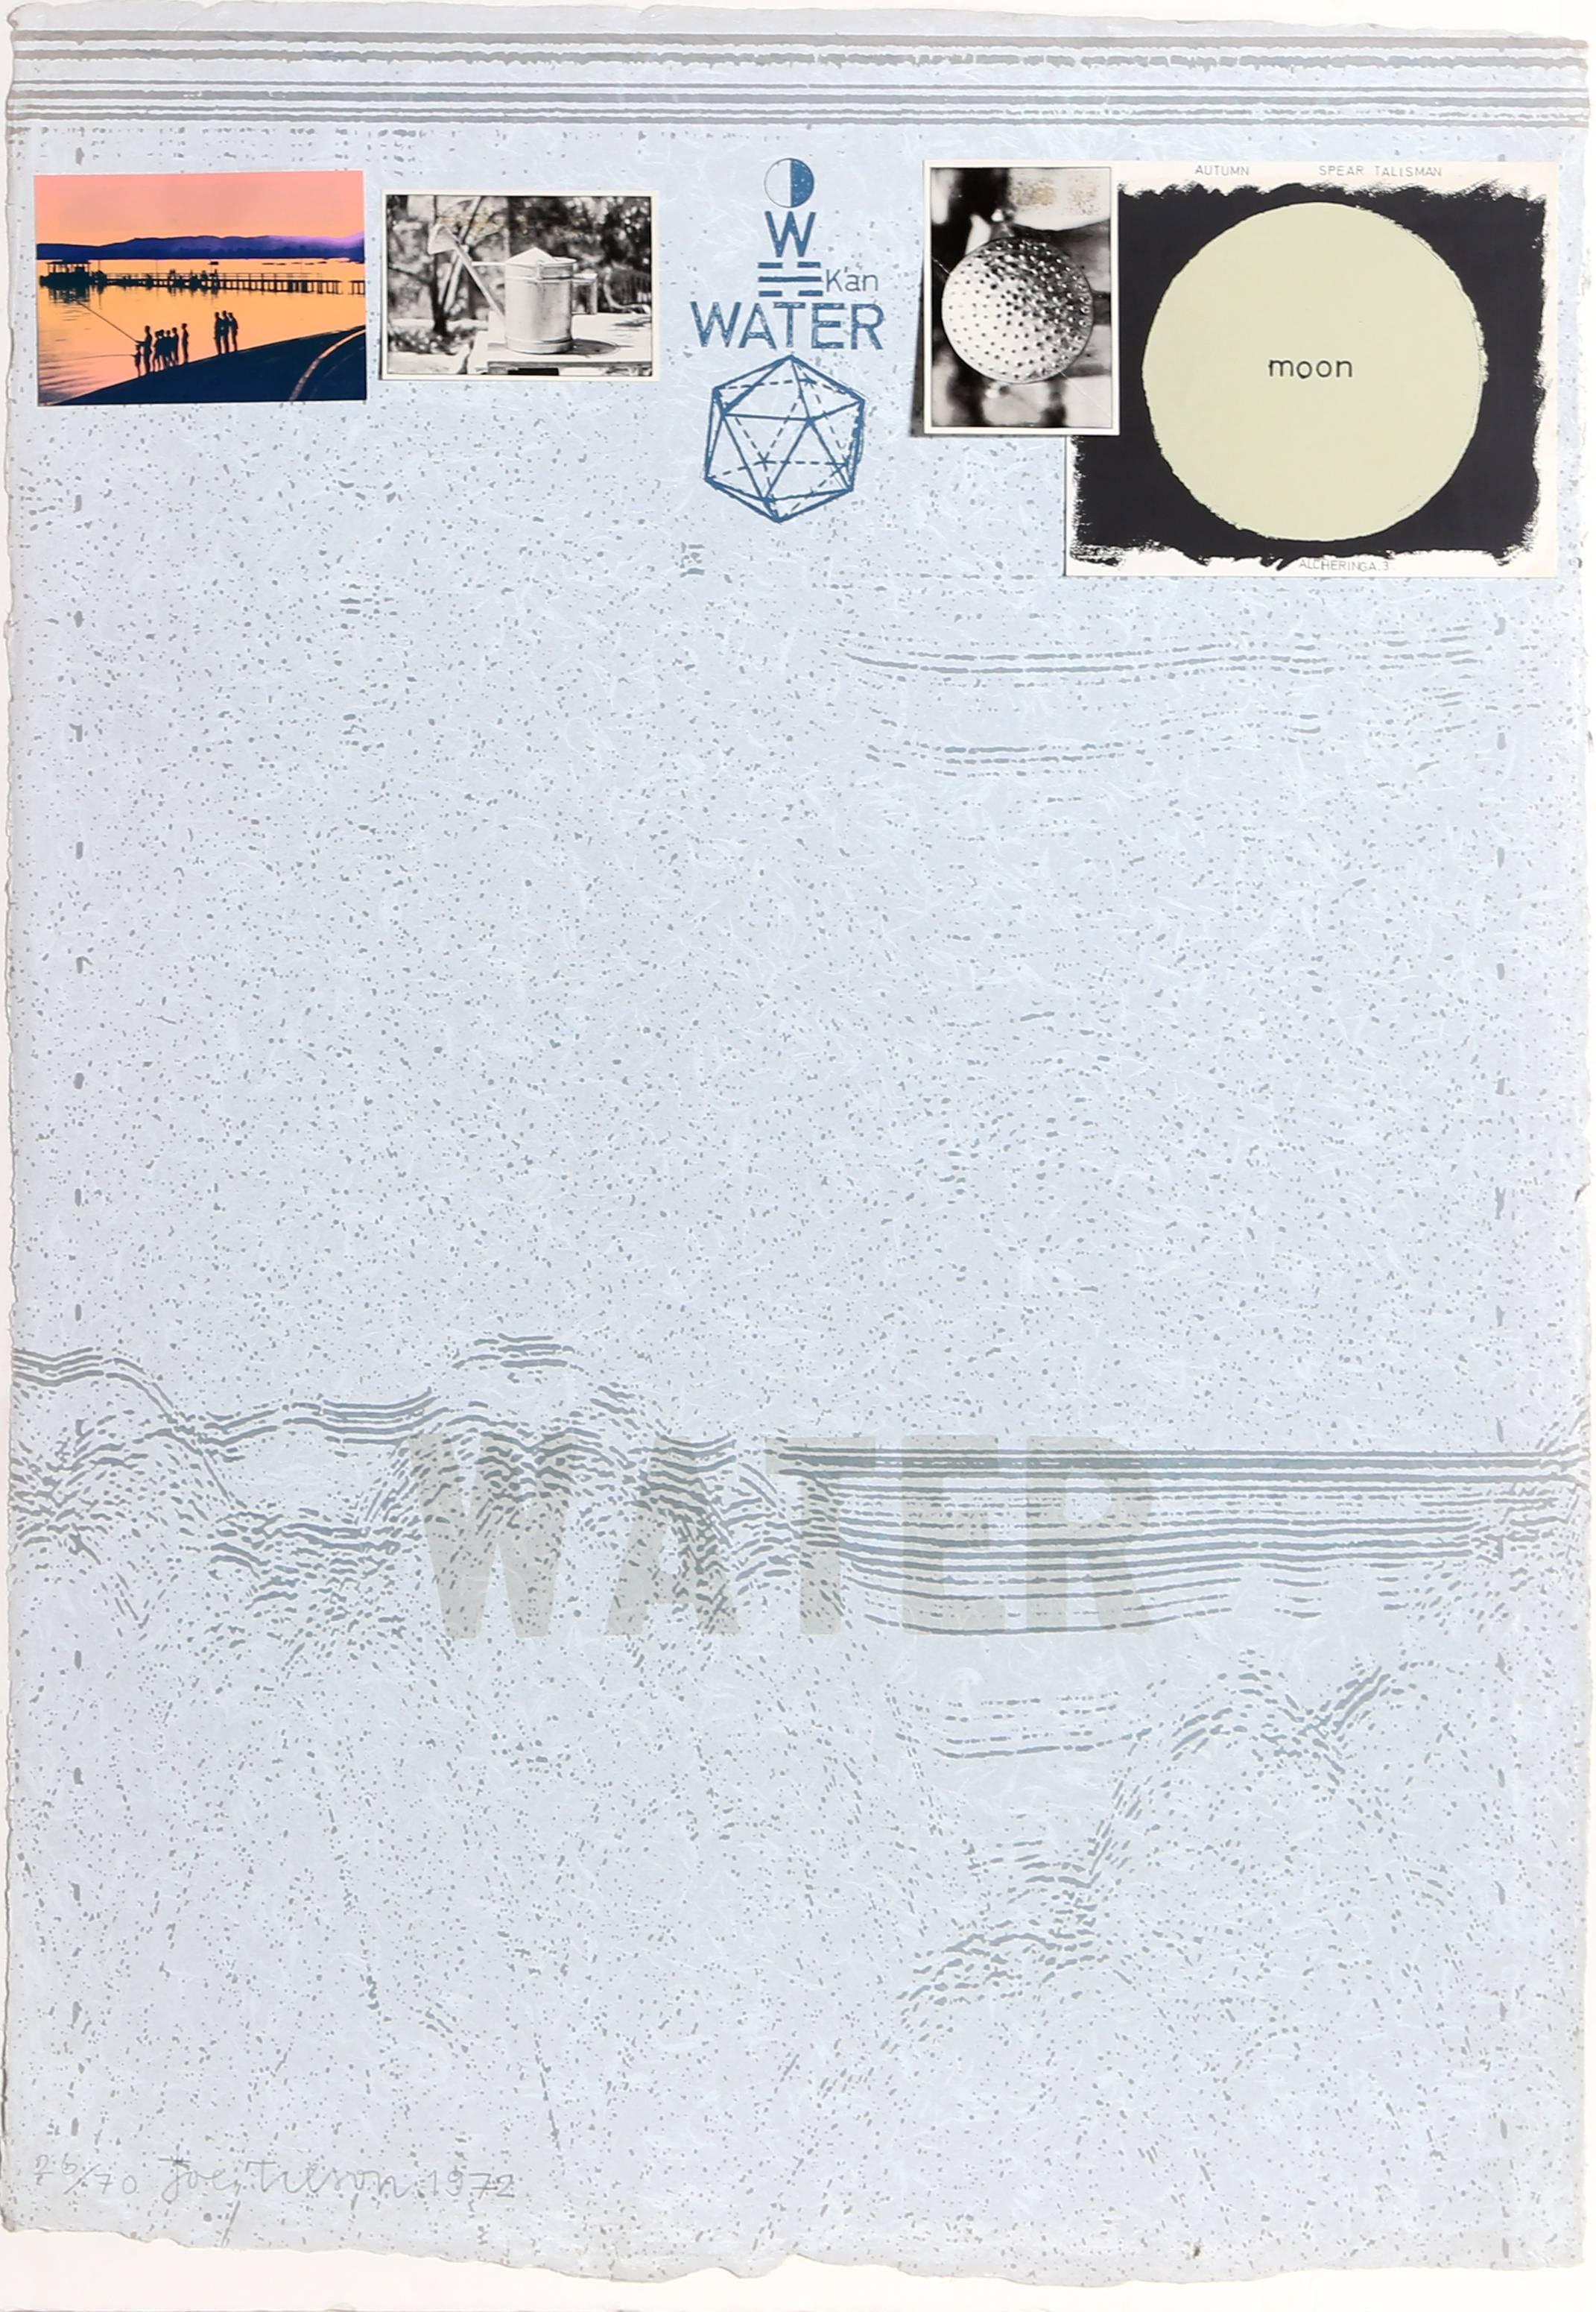 Artist: Joe Tilson, British (1928 - )
Title: Water
Year: 1972
Medium: Silkscreen and Collage on Rice Paper, signed and numbered in pencil
Edition: 26/70
Size: 38 in. x 26.5 in. (96.52 cm x 67.31 cm)